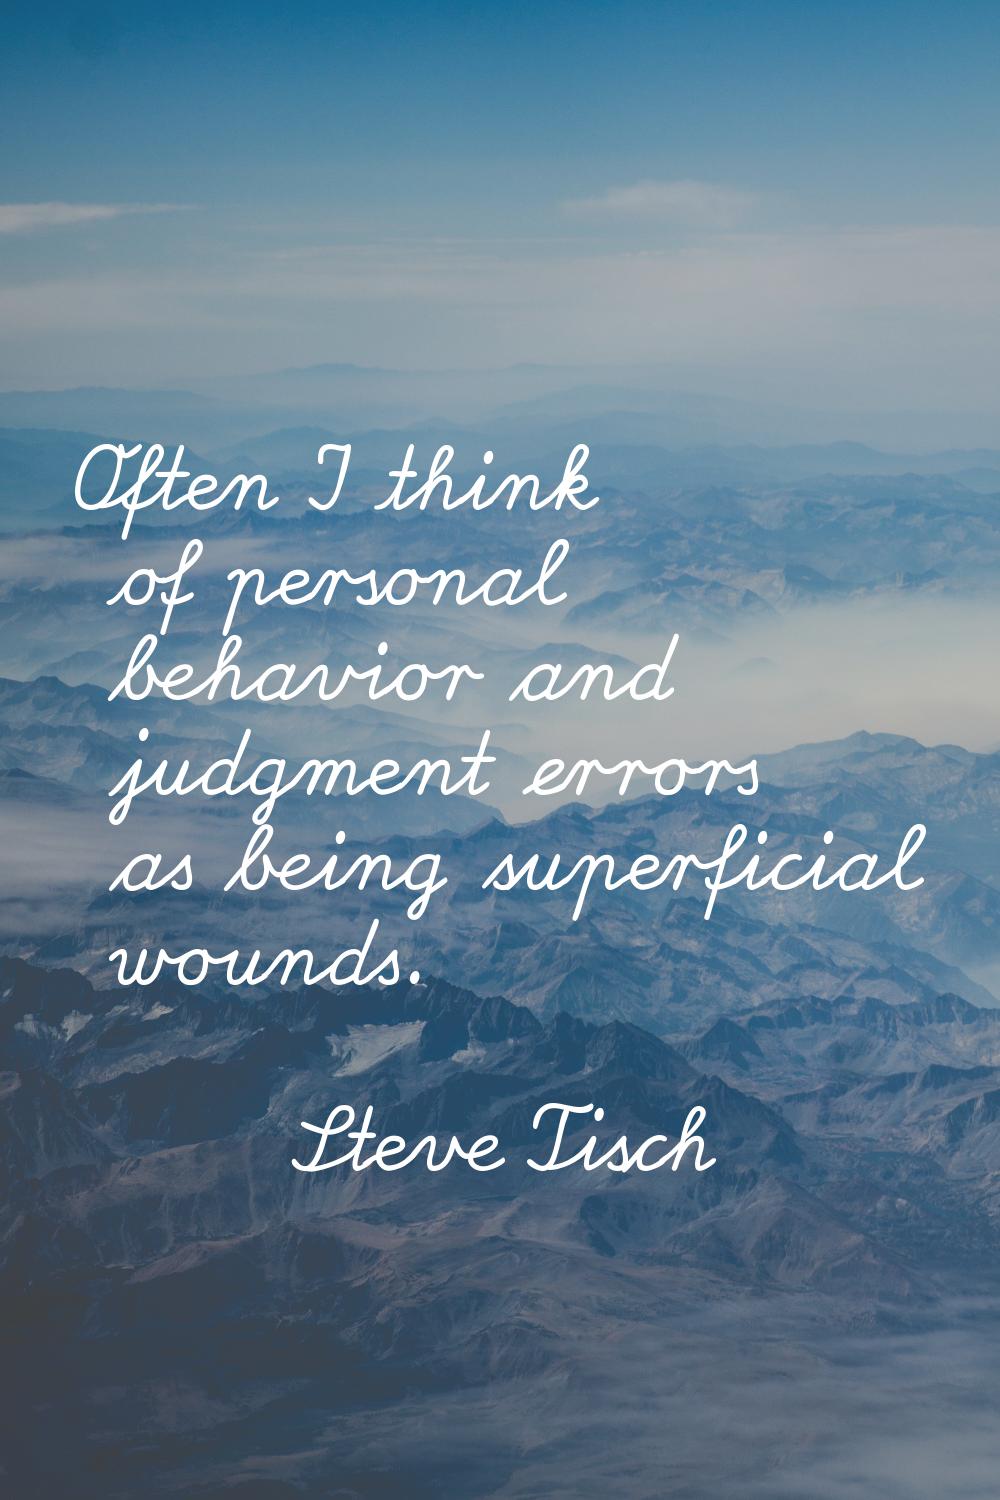 Often I think of personal behavior and judgment errors as being superficial wounds.